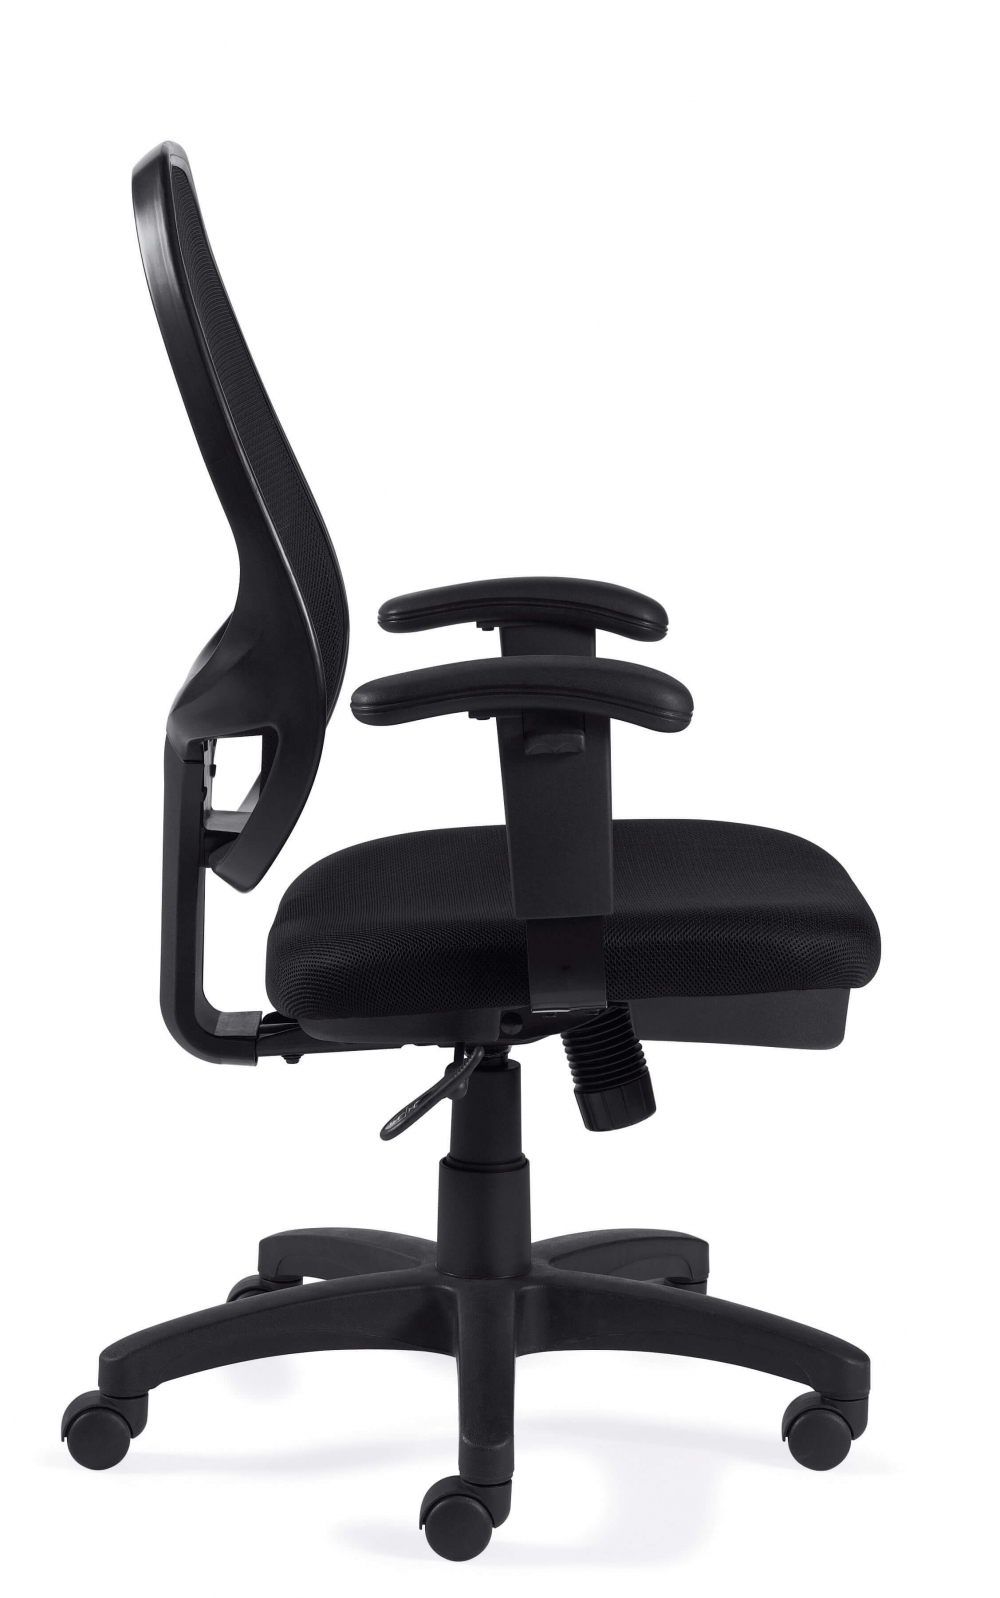 Adjustable chairs side view